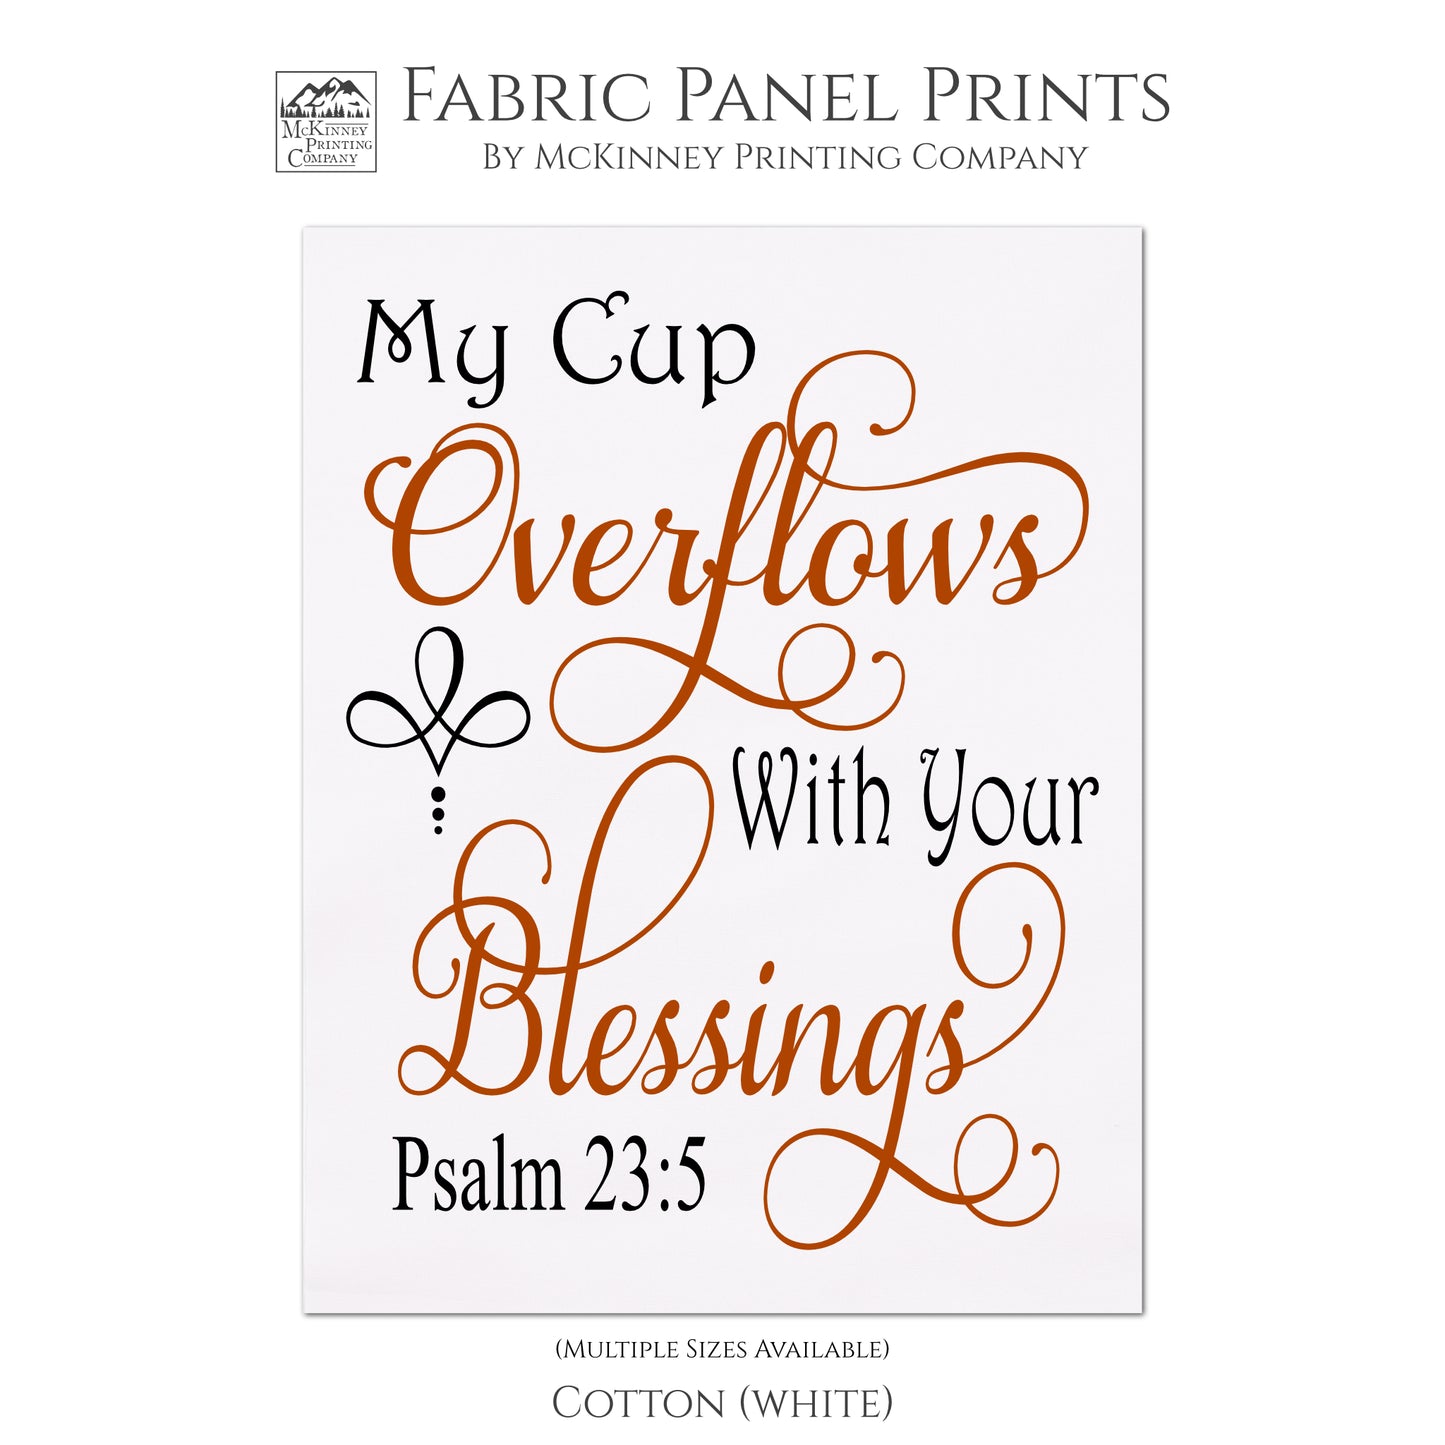 My cup overflows with your blessings - Psalm 23 5 - Fabric Panel Print, Large Block Print, Quilt Fabric, Scripture - Cotton, White